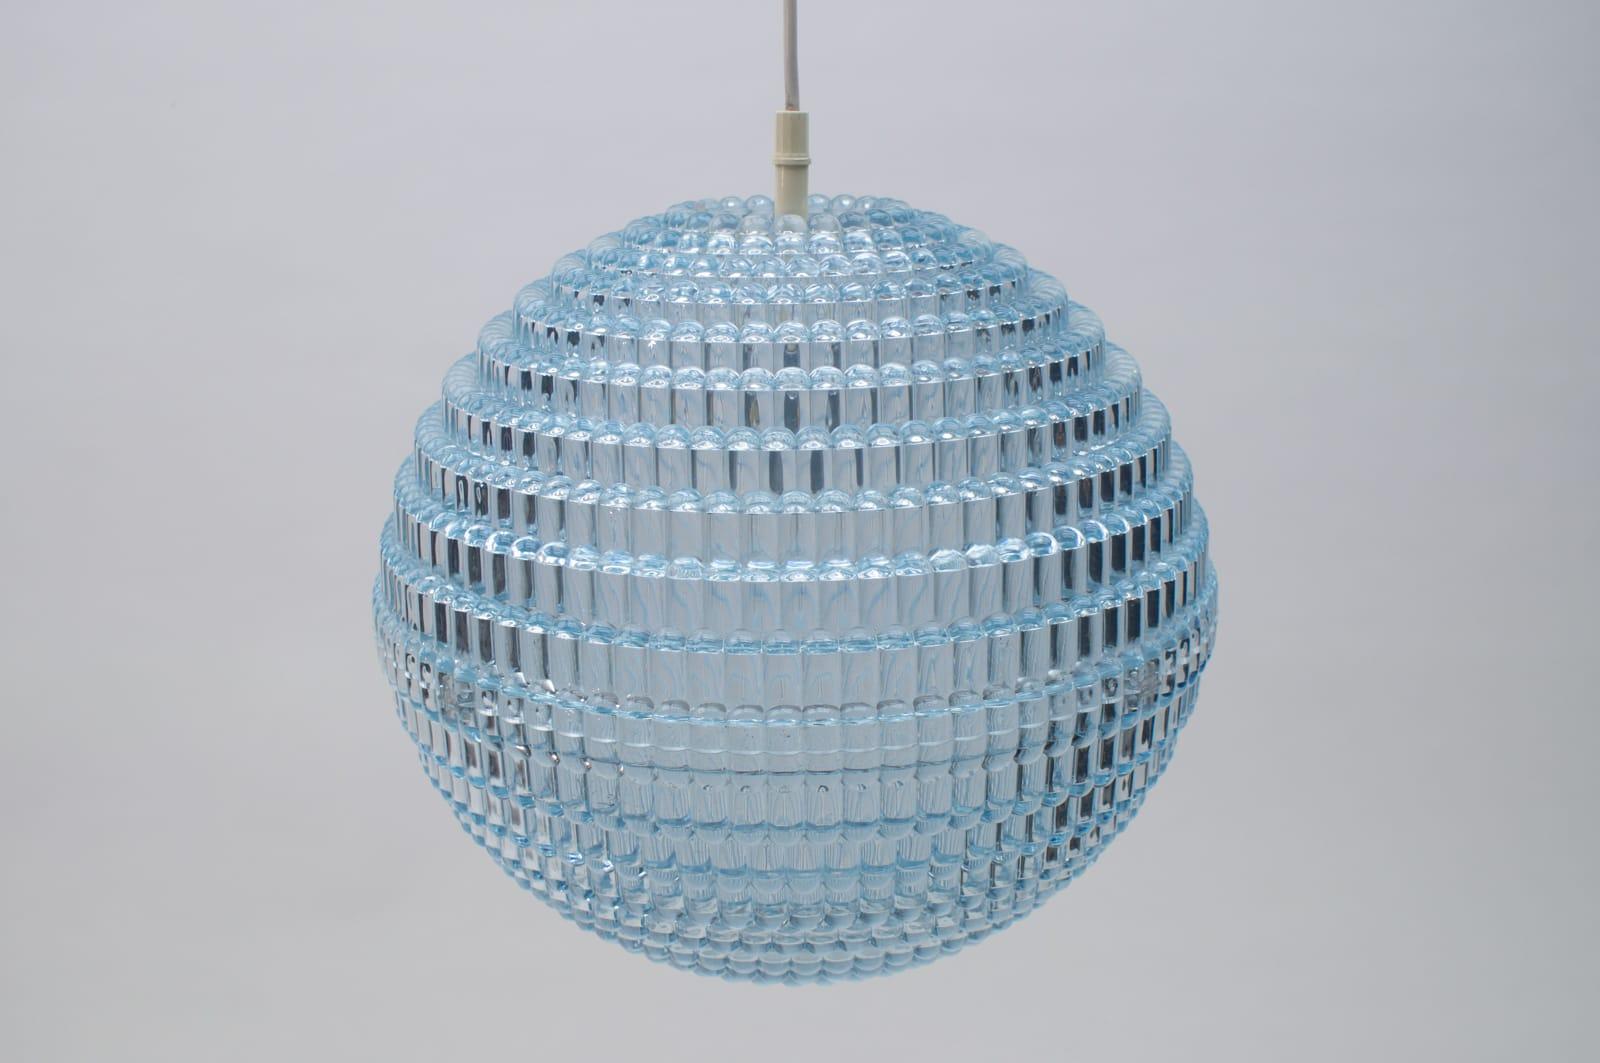 Acrylic Rare Ceiling Geometric Lamp by Aloys F. Gangkofner for Erco Leuchten, 1960 For Sale